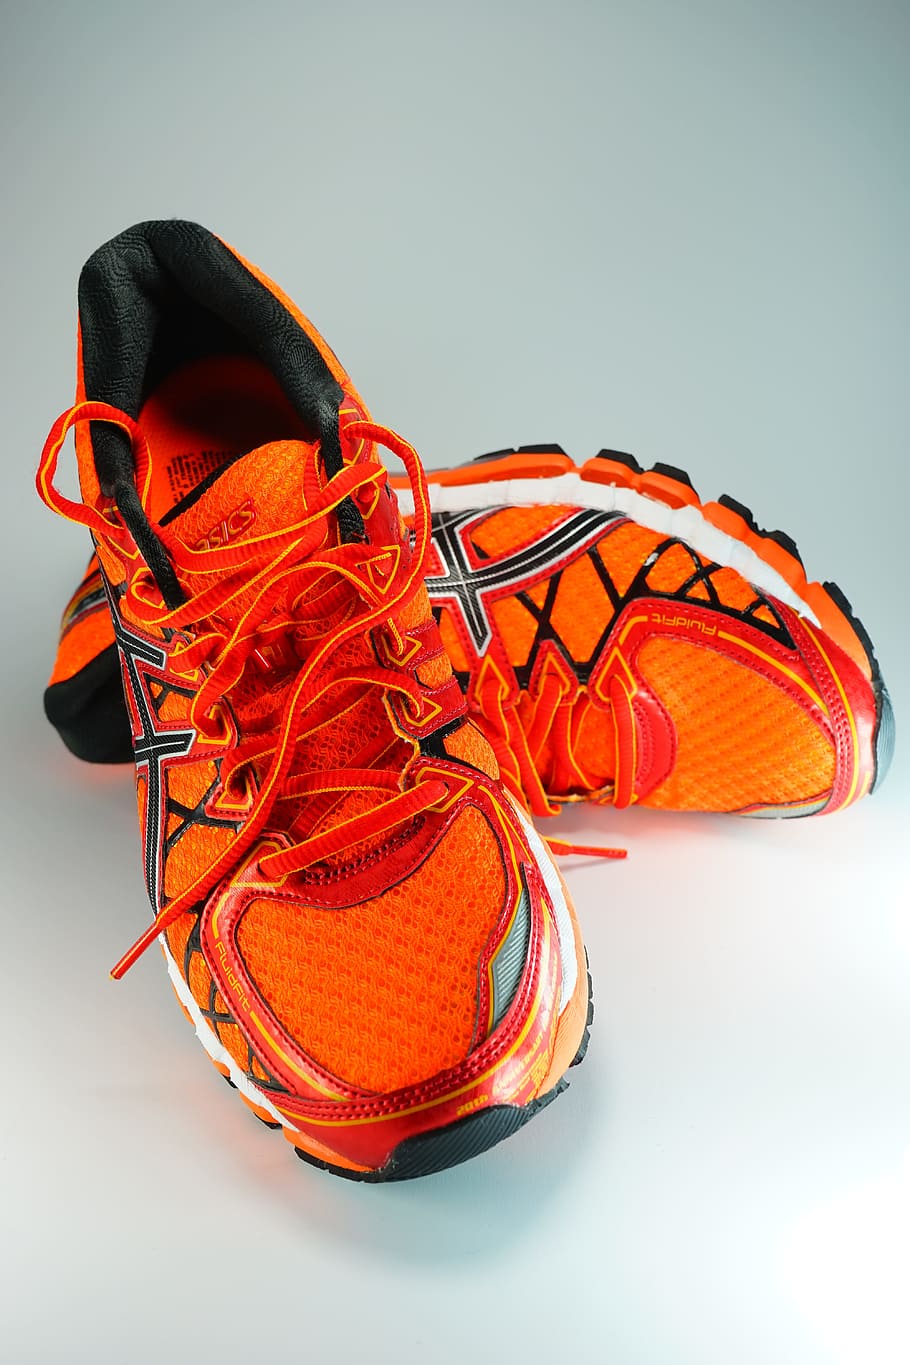 pair of orange-and-white ASICS running shoes, sneakers, sports shoes